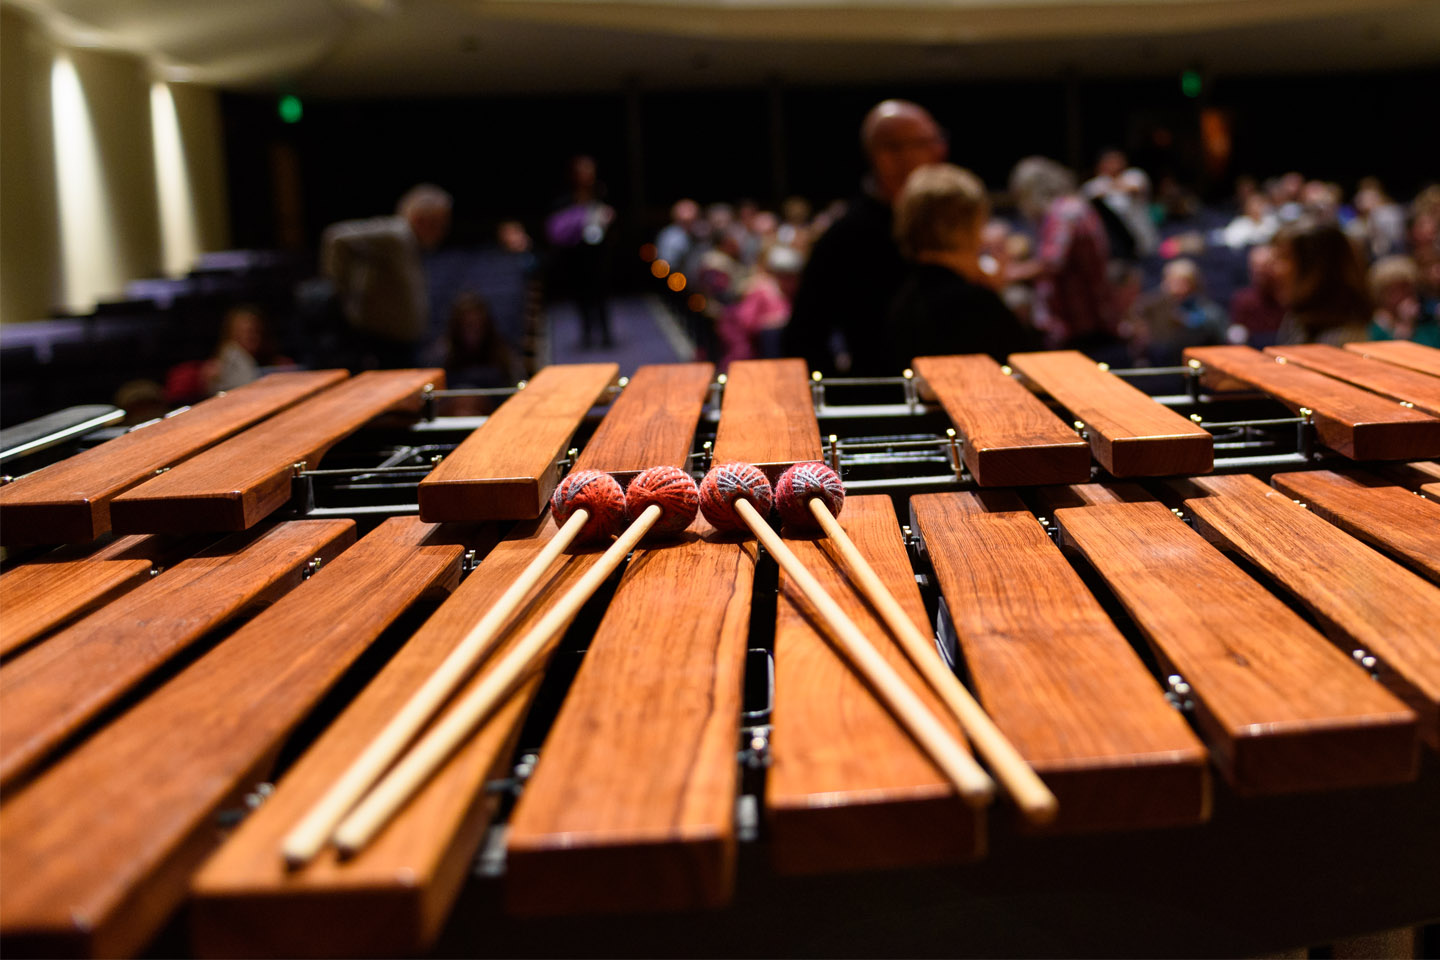 Marimba mallets resting on a marimba in a large concert hall